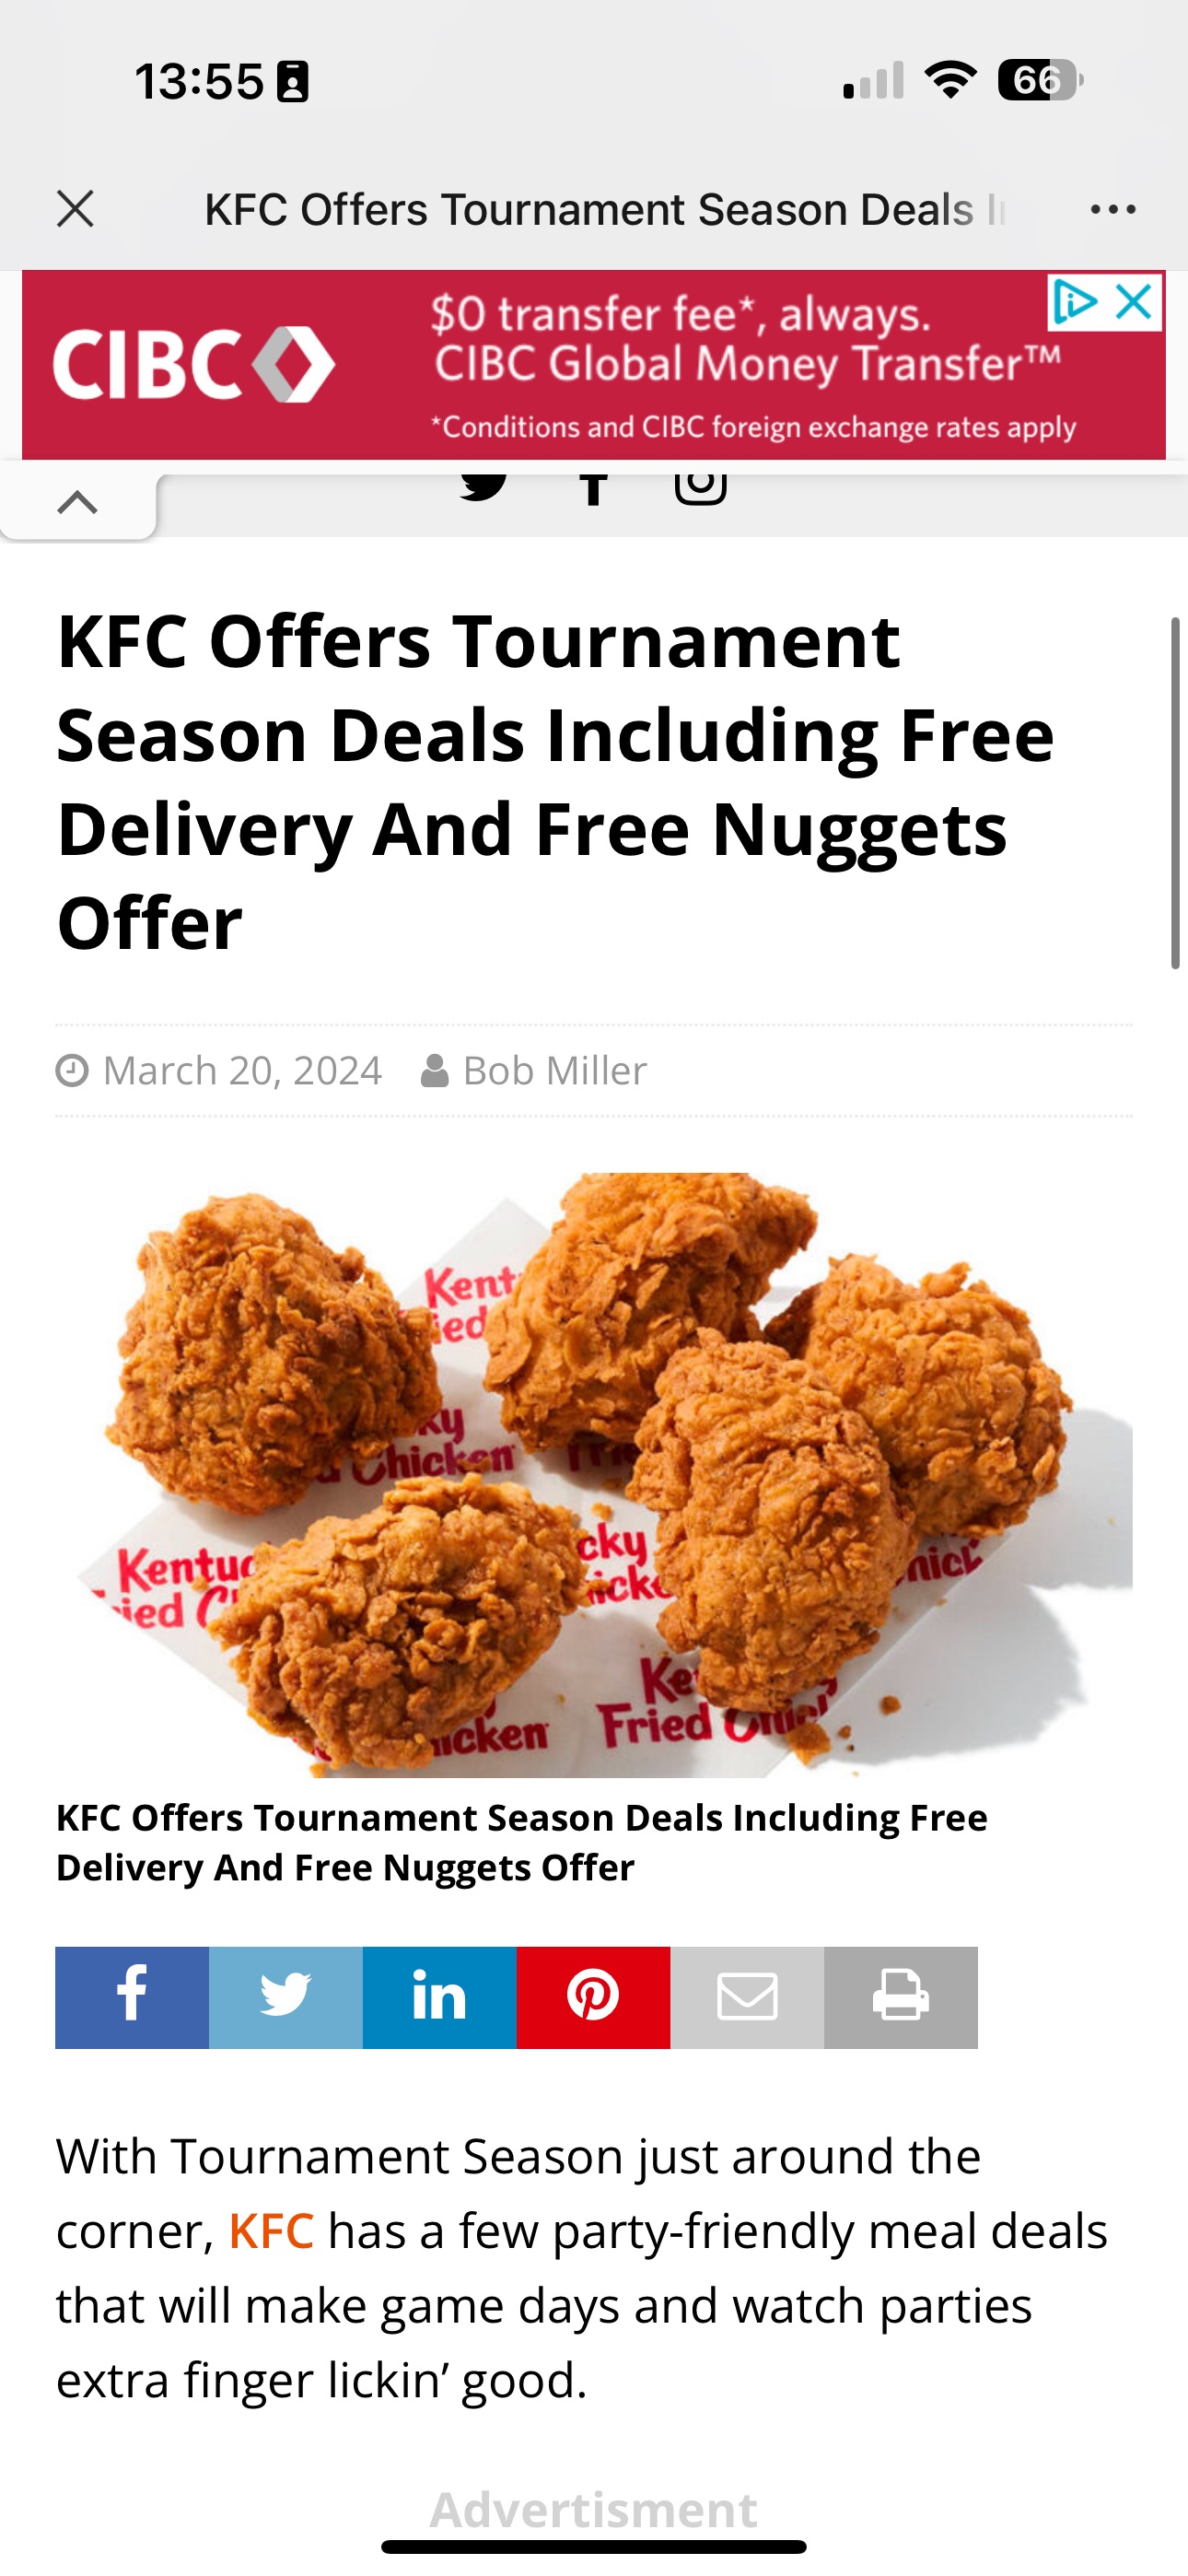 KFC Offers Tournament Season Deals Including Free Delivery And Free Nuggets Offer